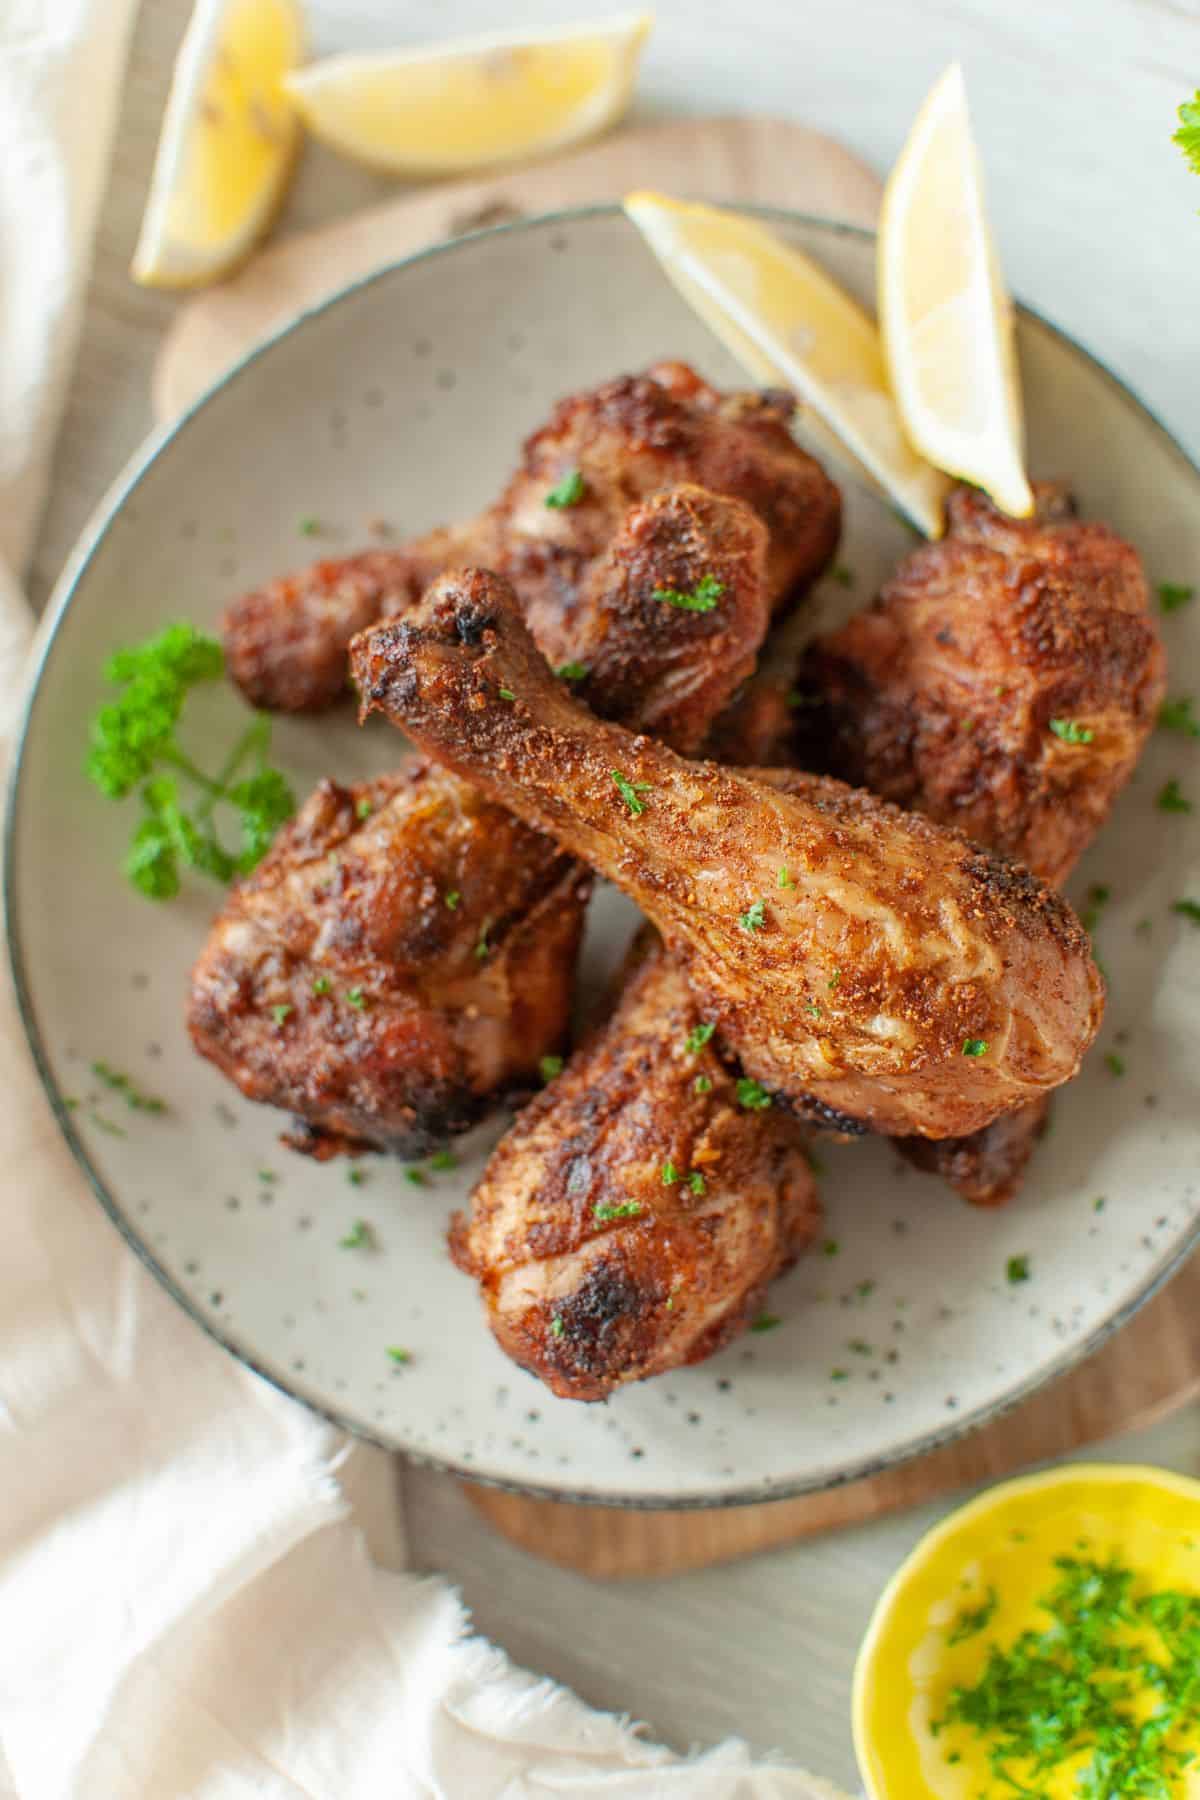 Overhead view of chicken drumsticks on a plate, garnished with parsley, with 2 lemon slices